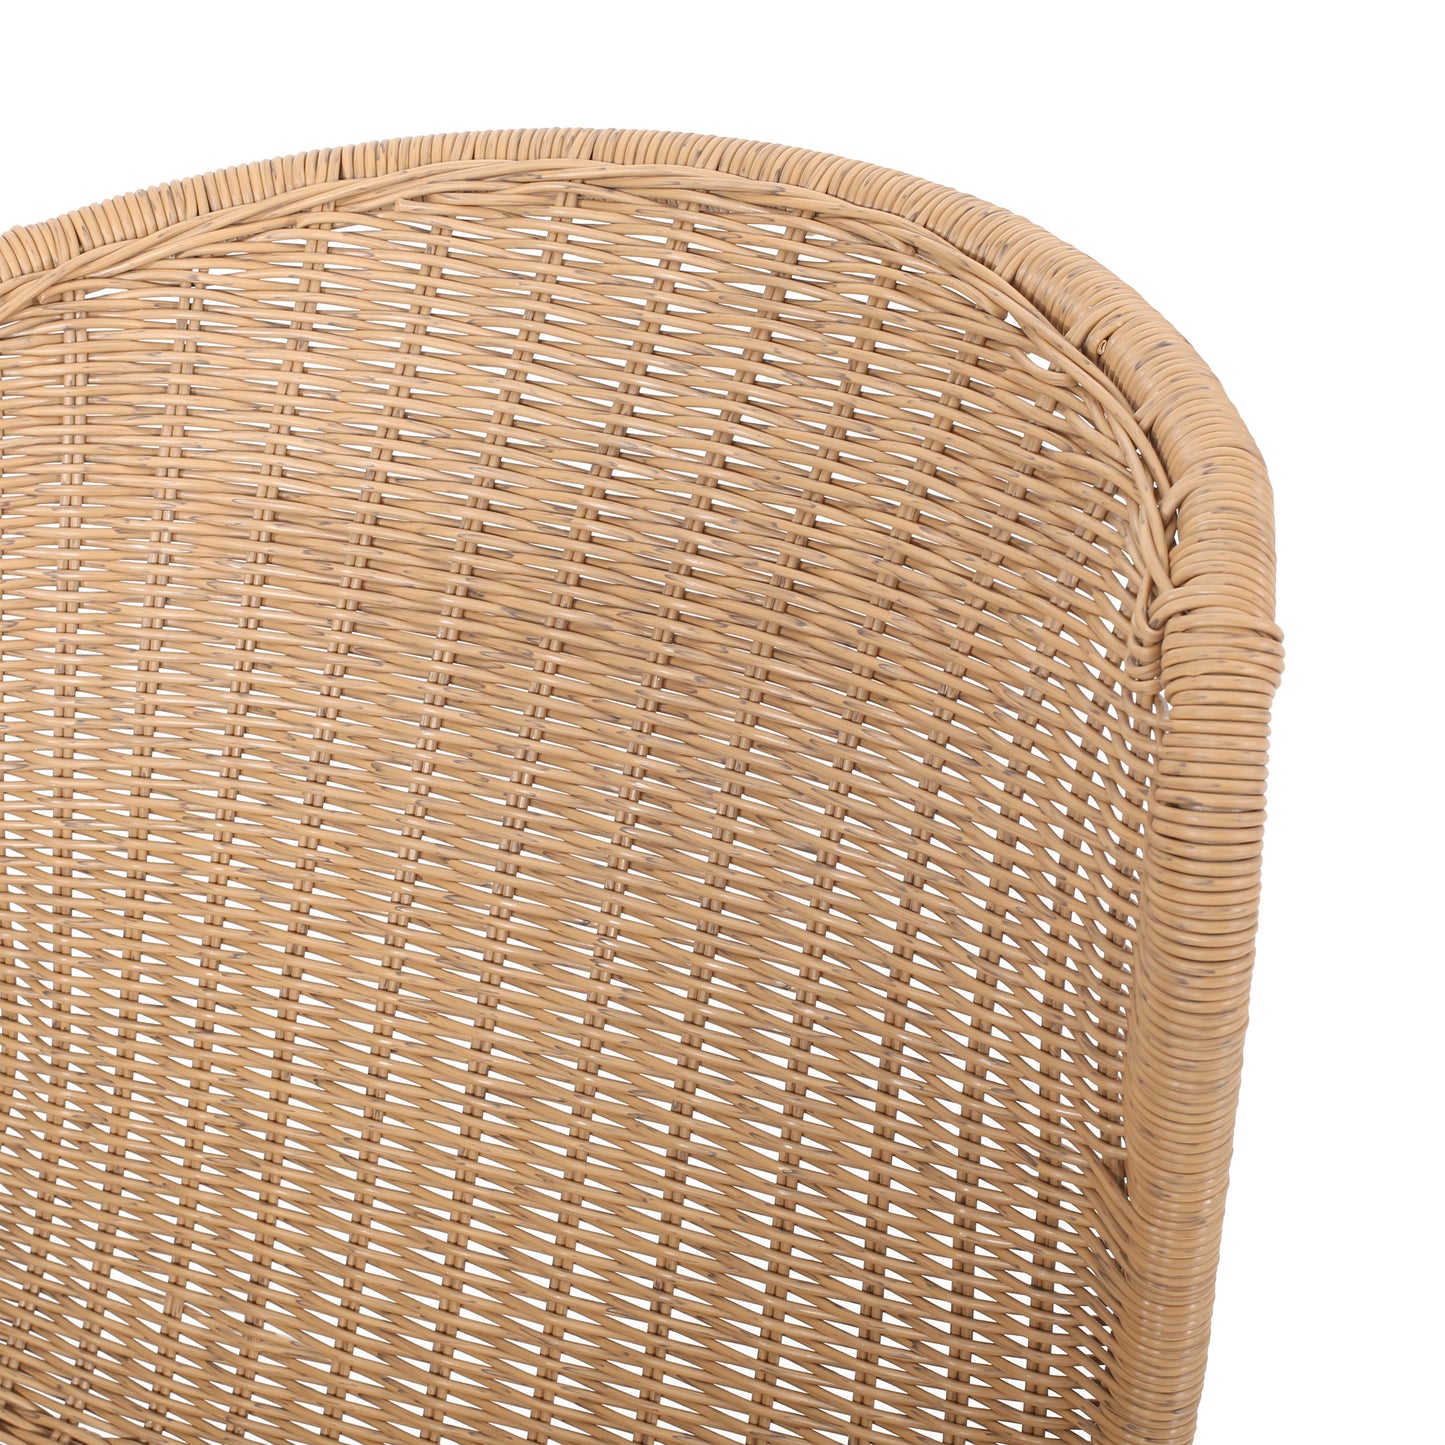 Akim Outdoor Boho Wicker Dining Chair (Set of 2)